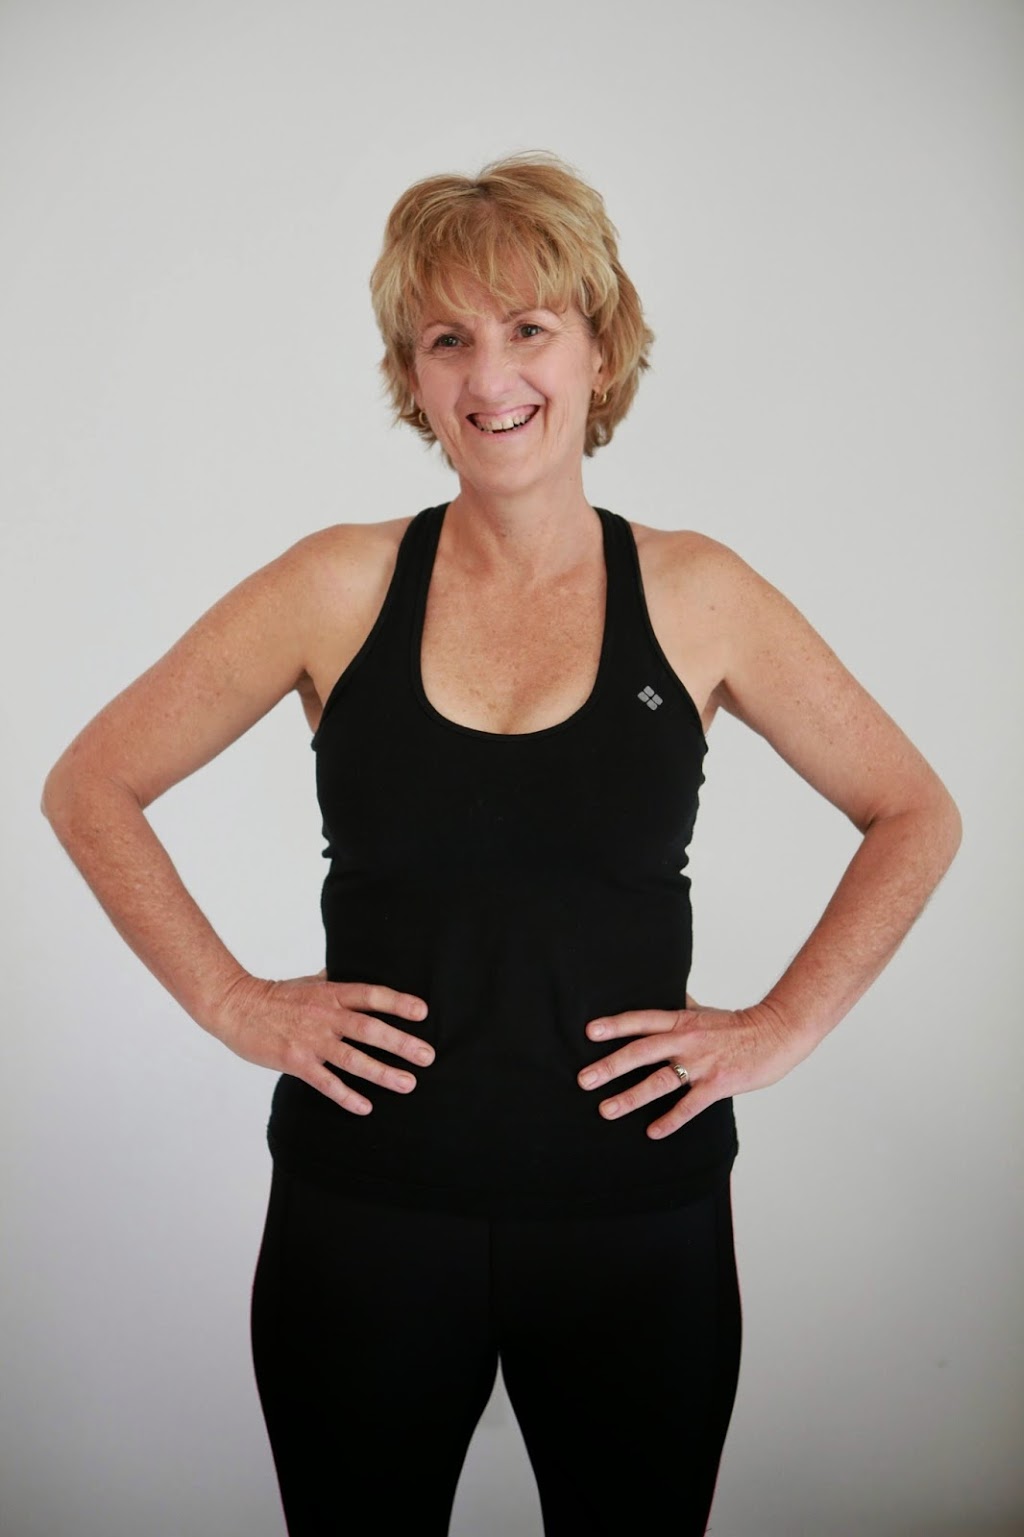 Sheryl Thomas Fitness & Weight Loss | health | 61 York Rd, Mount Evelyn VIC 3796, Australia | 0397361570 OR +61 3 9736 1570